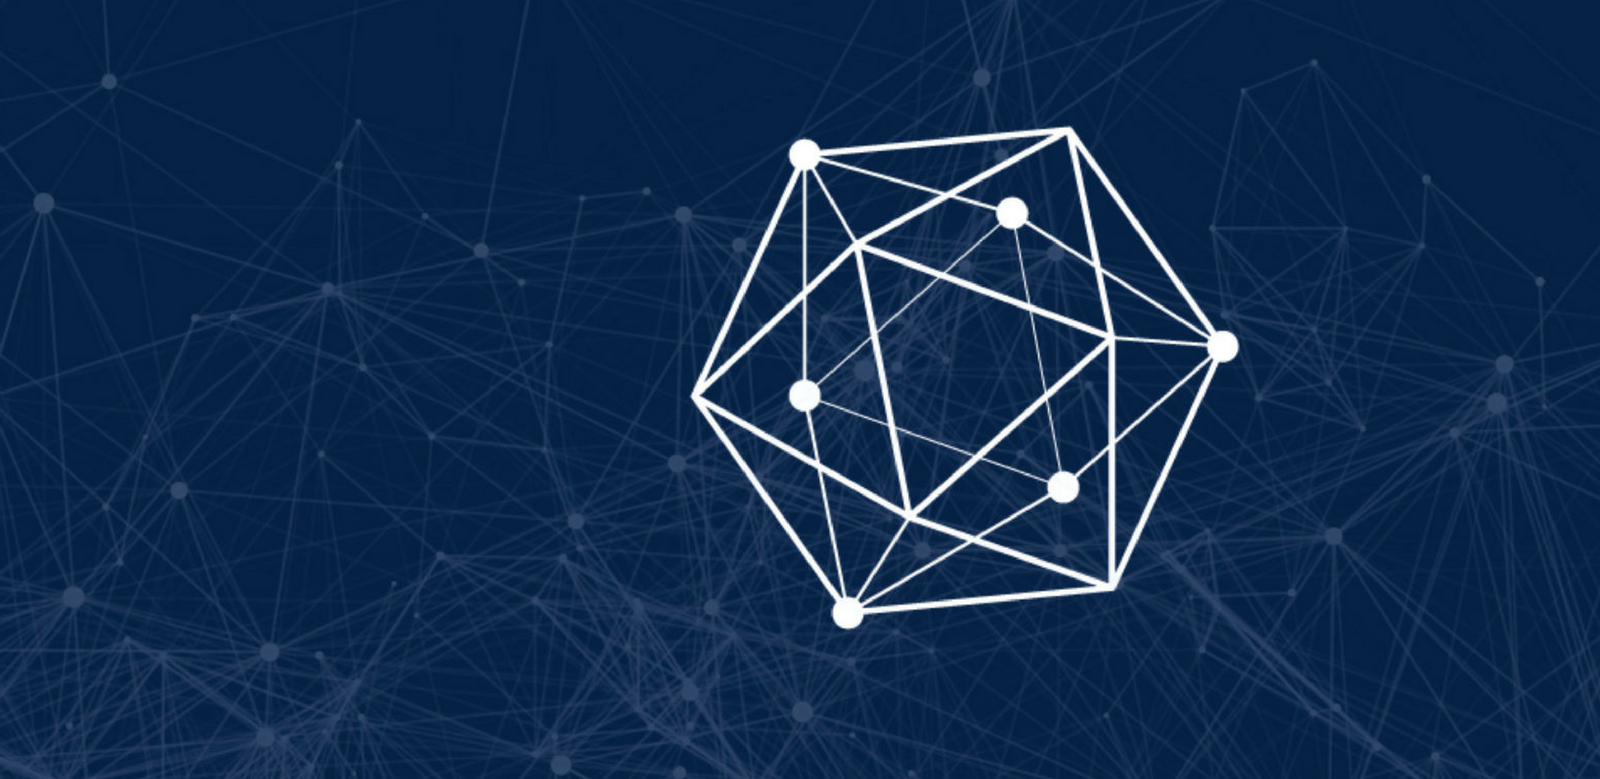 HYPERLEDGER HAS LAUNCHED A NEW TOOL FOR BLOCKCHAIN DEVELOPERS